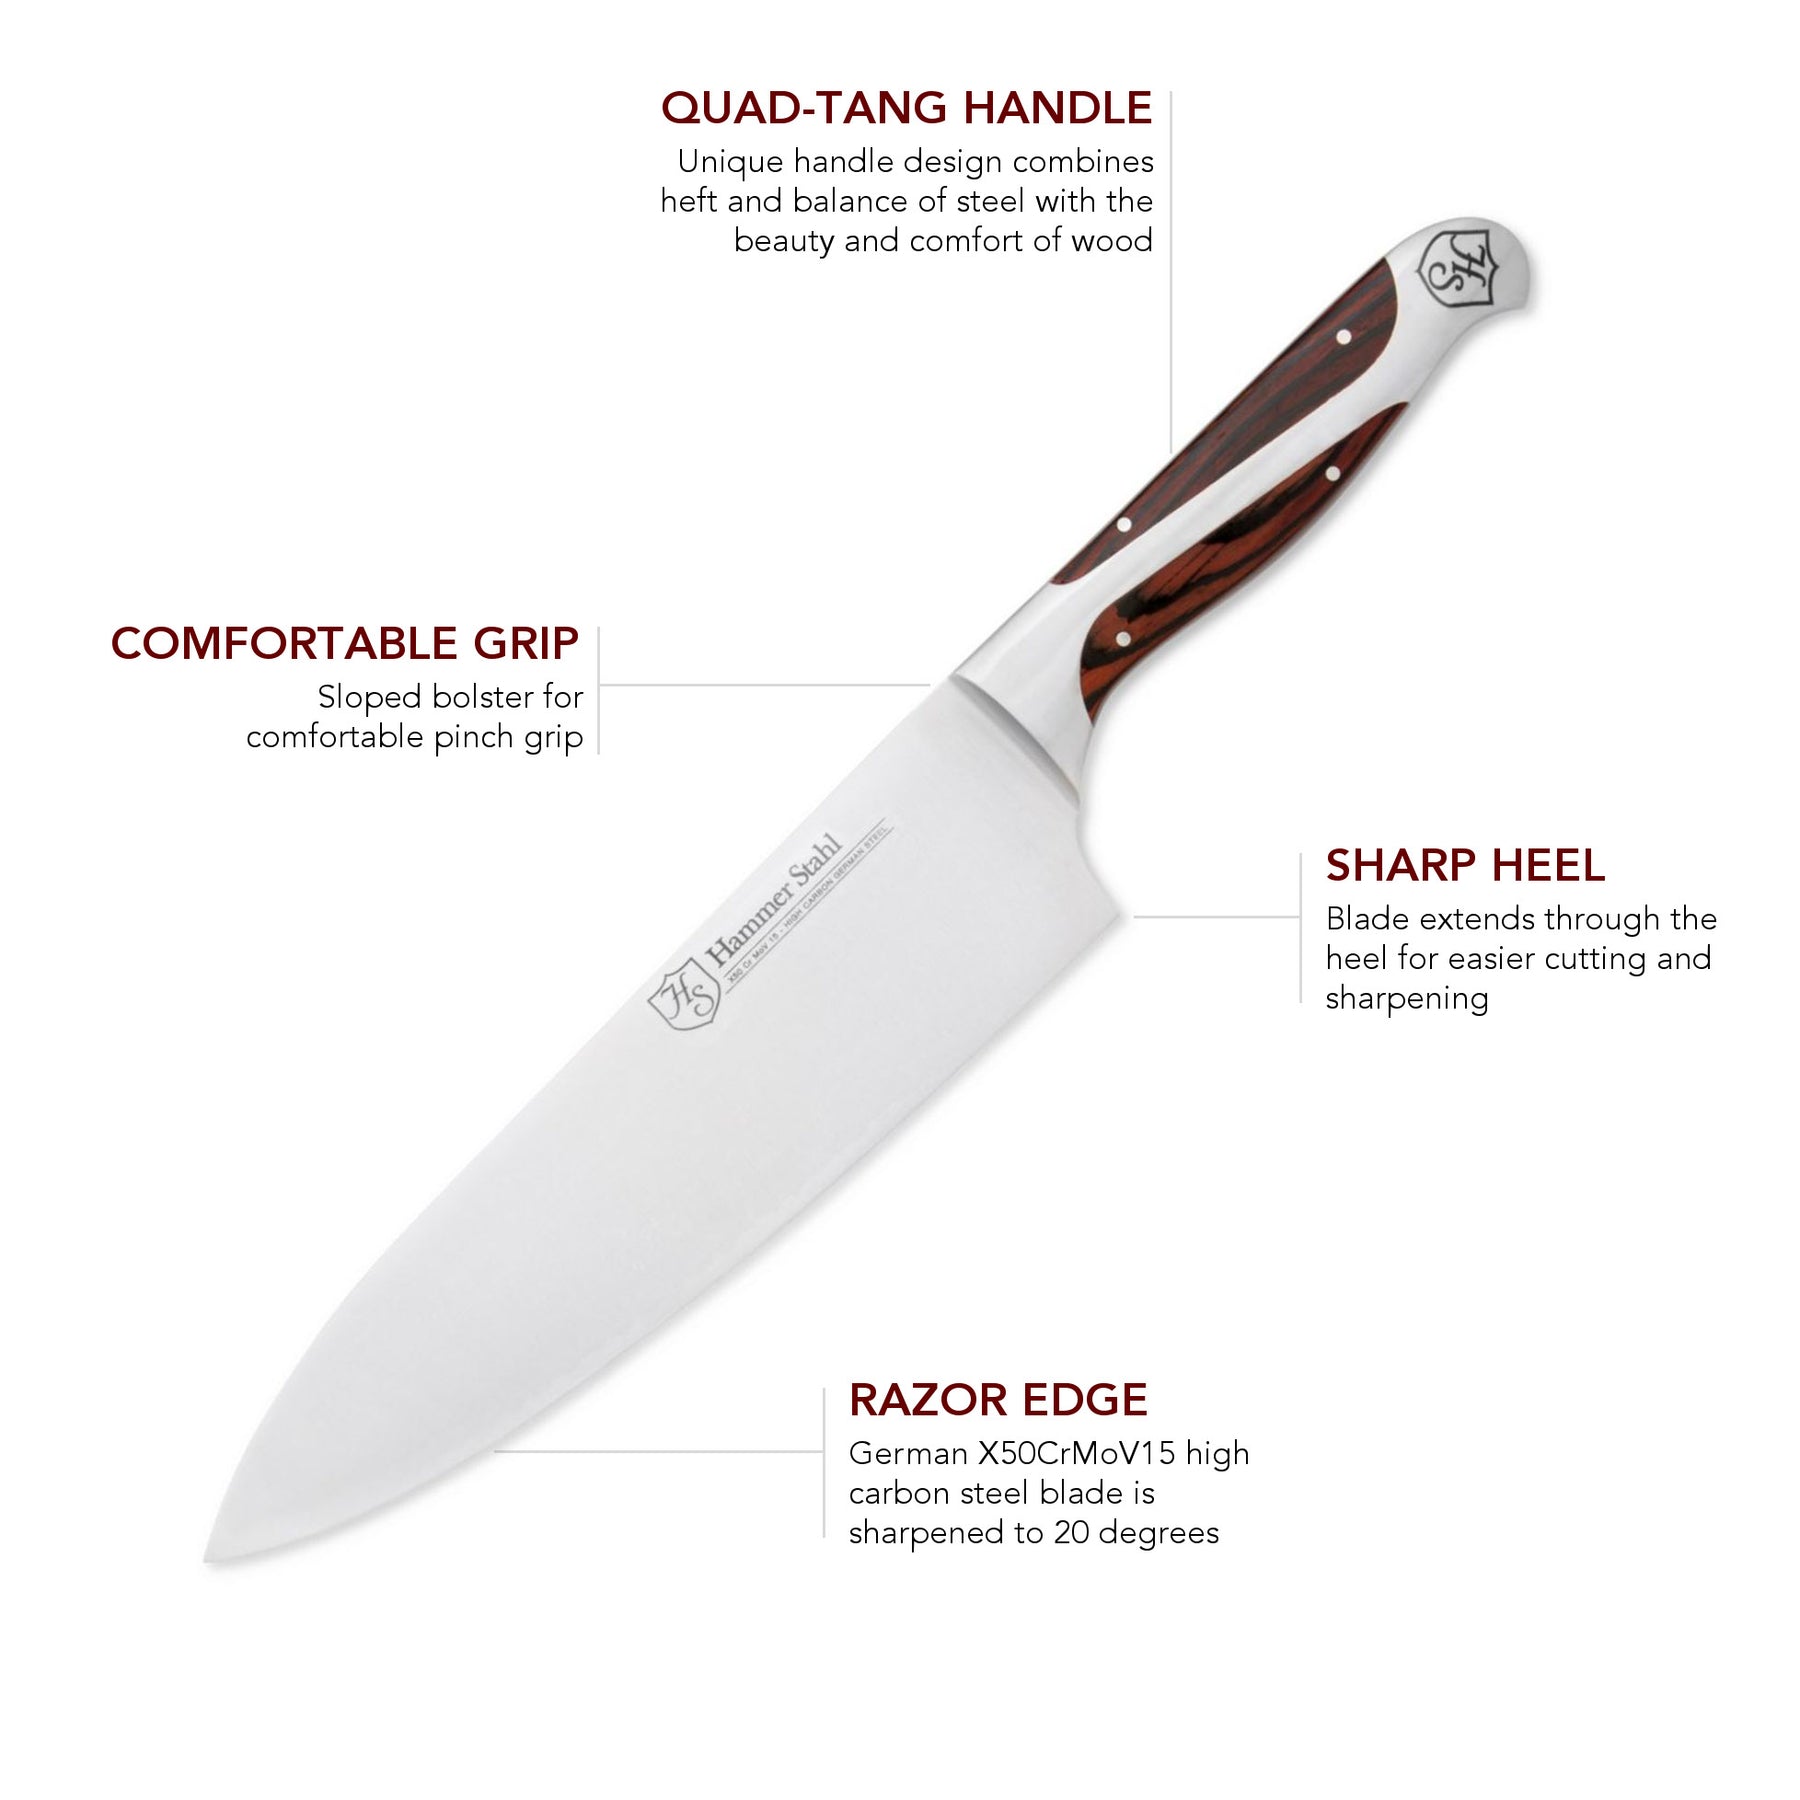 Heritage Steel 8 inch Chef Knife by Hammer Stahl